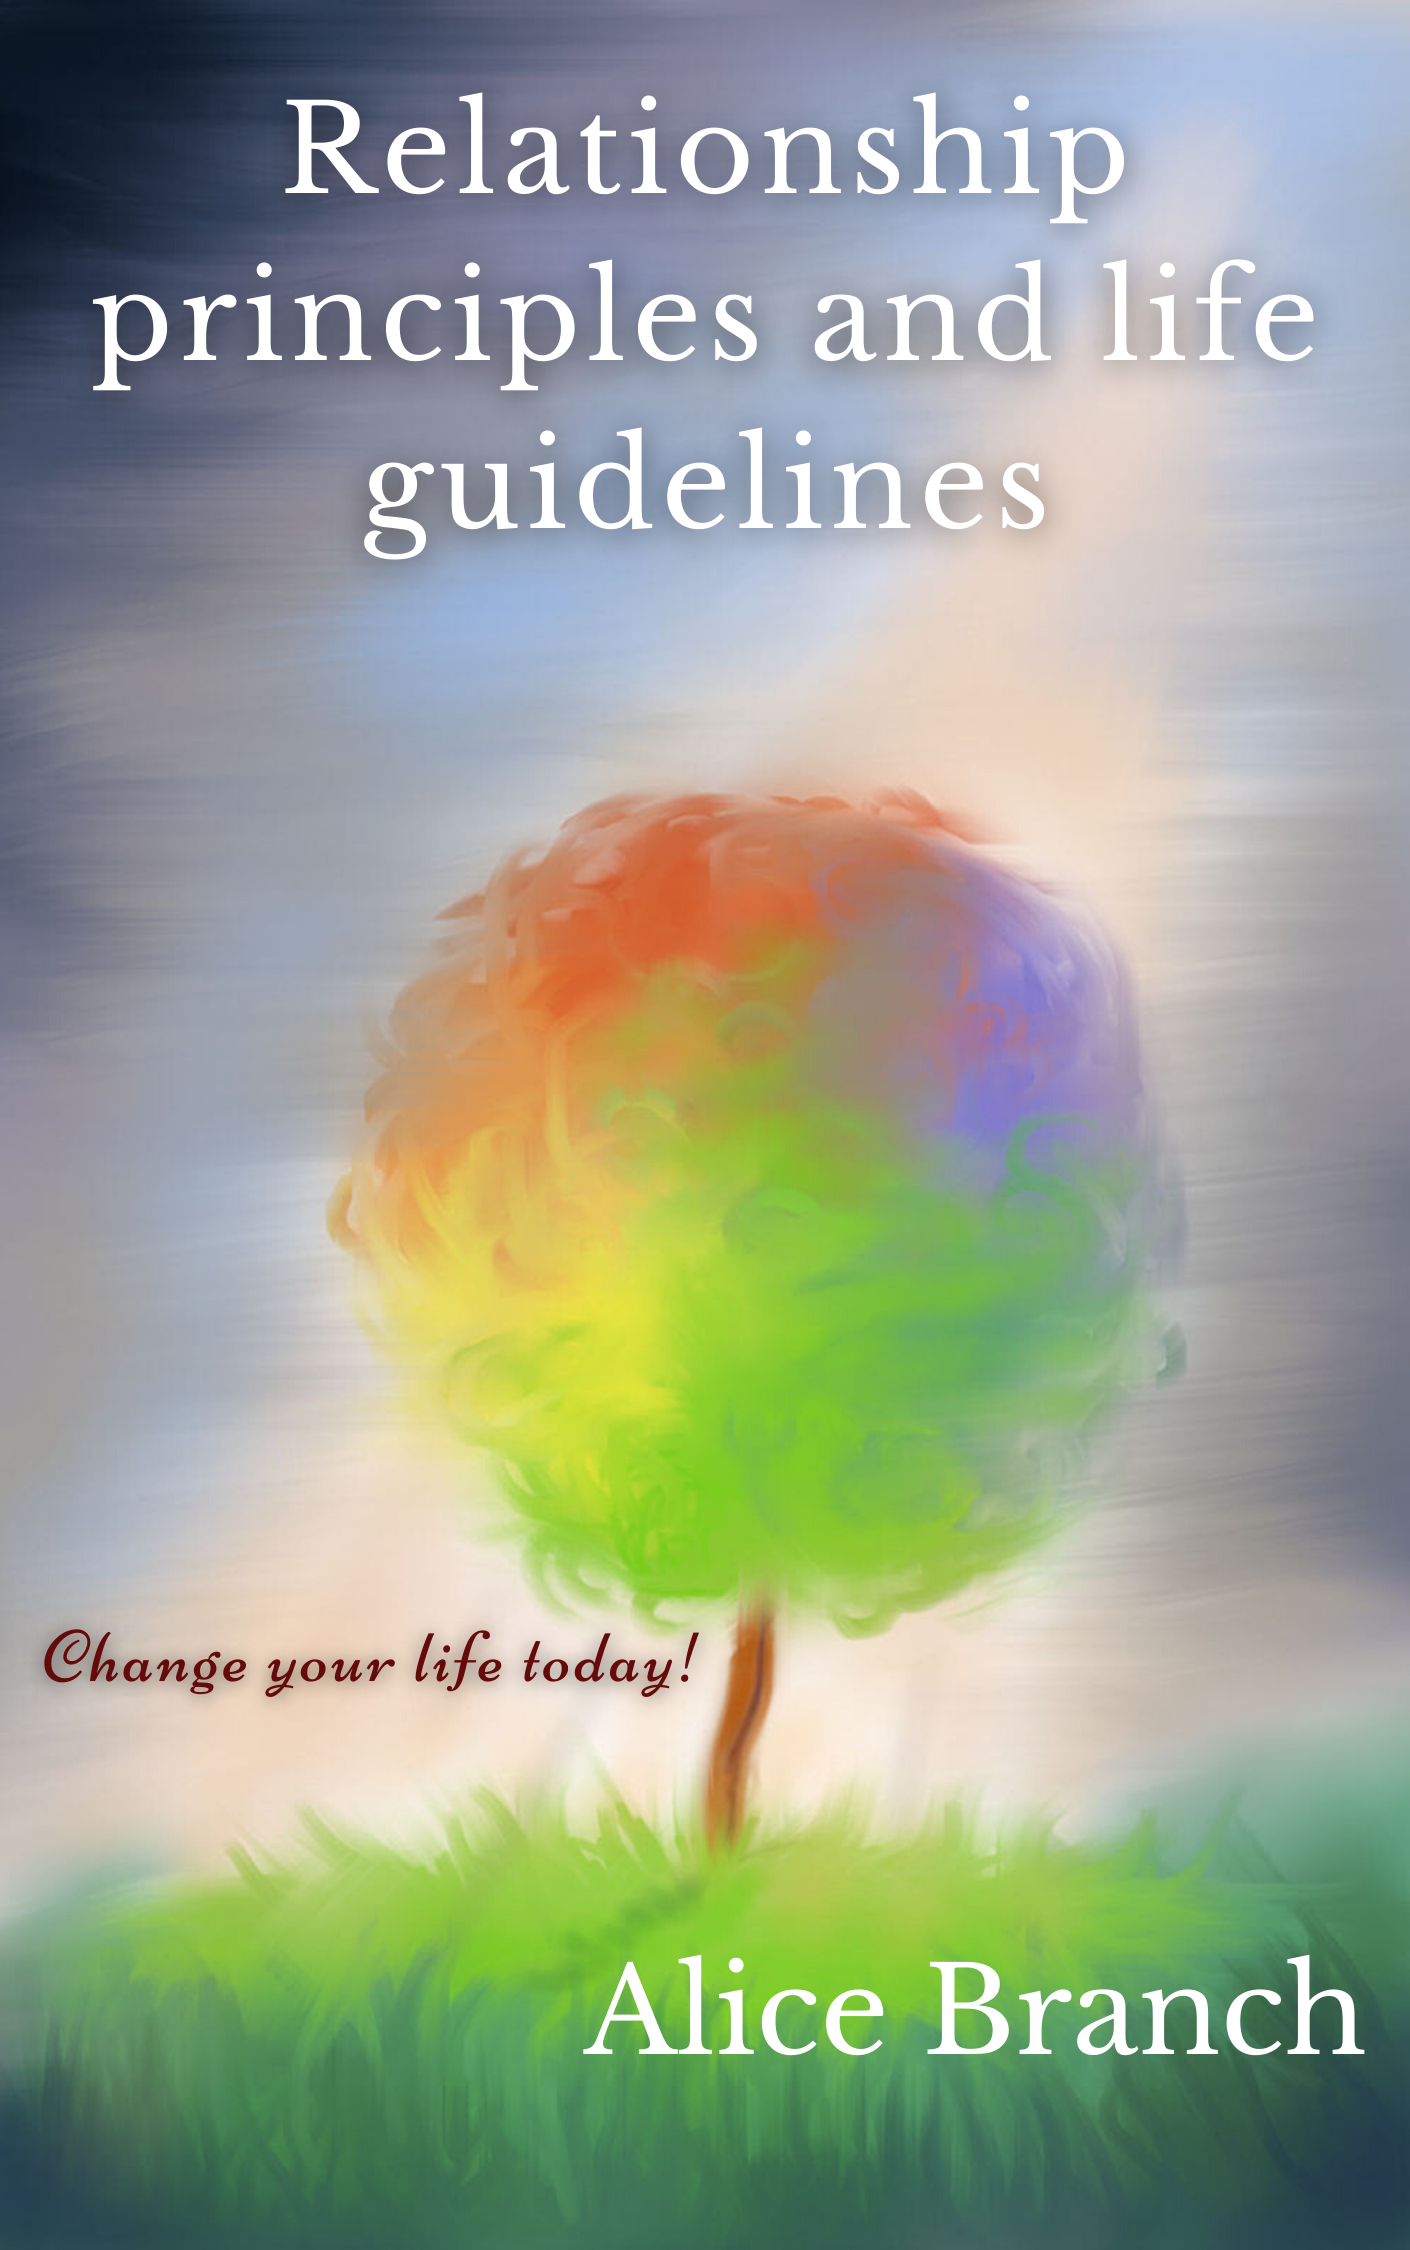 FREE: Relationship principles and life guidelines: Change your life today! by Alice Branch